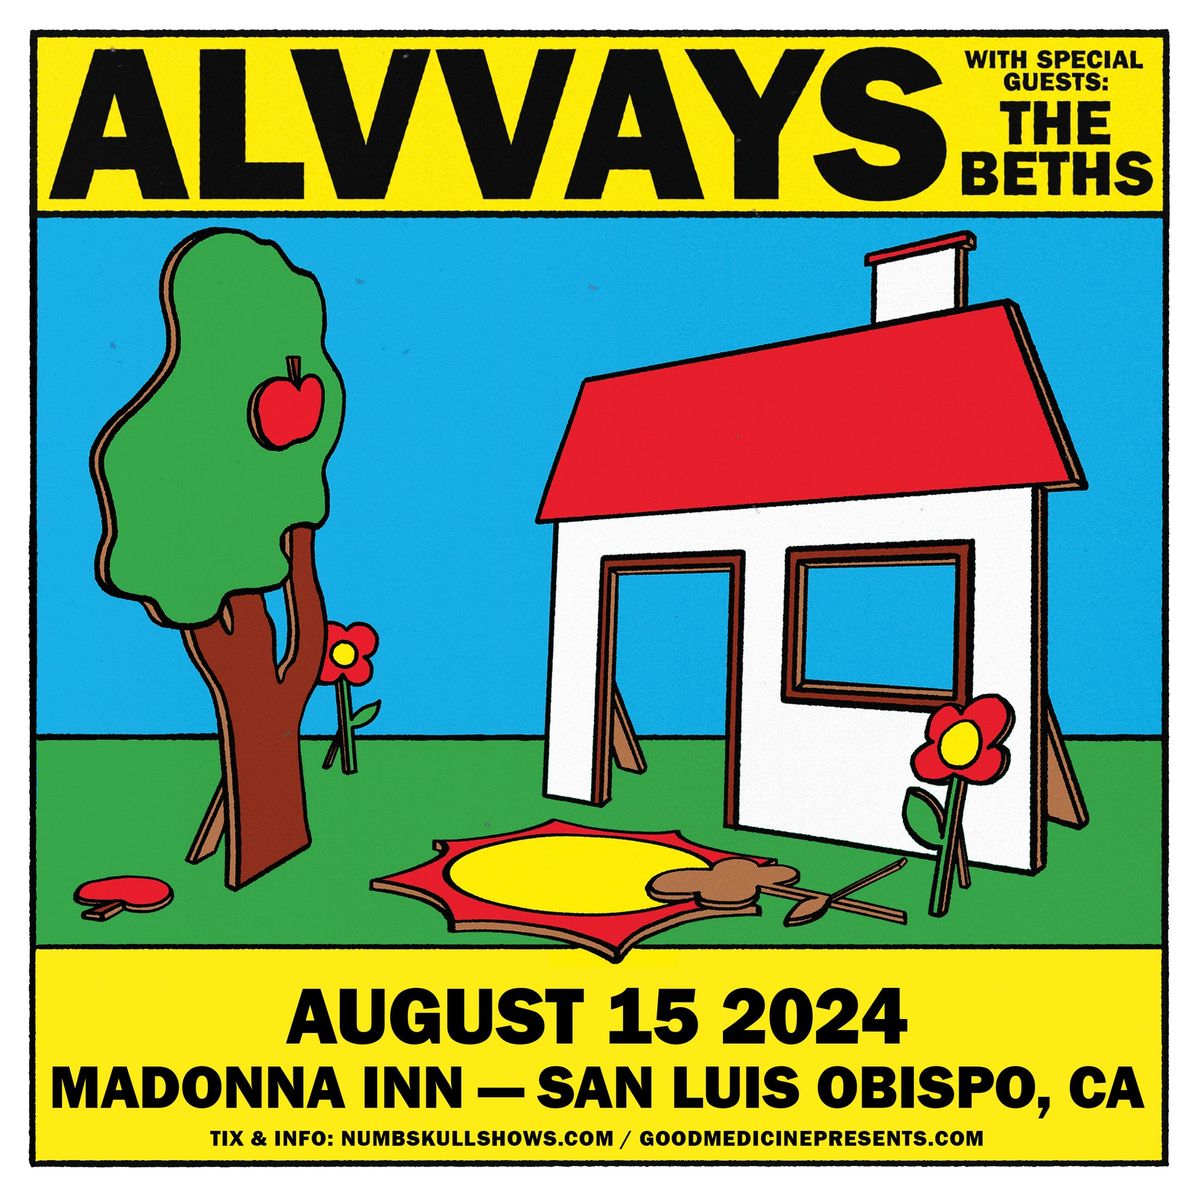 ALVVAYS and The Beths at Madonna Inn Expo Center